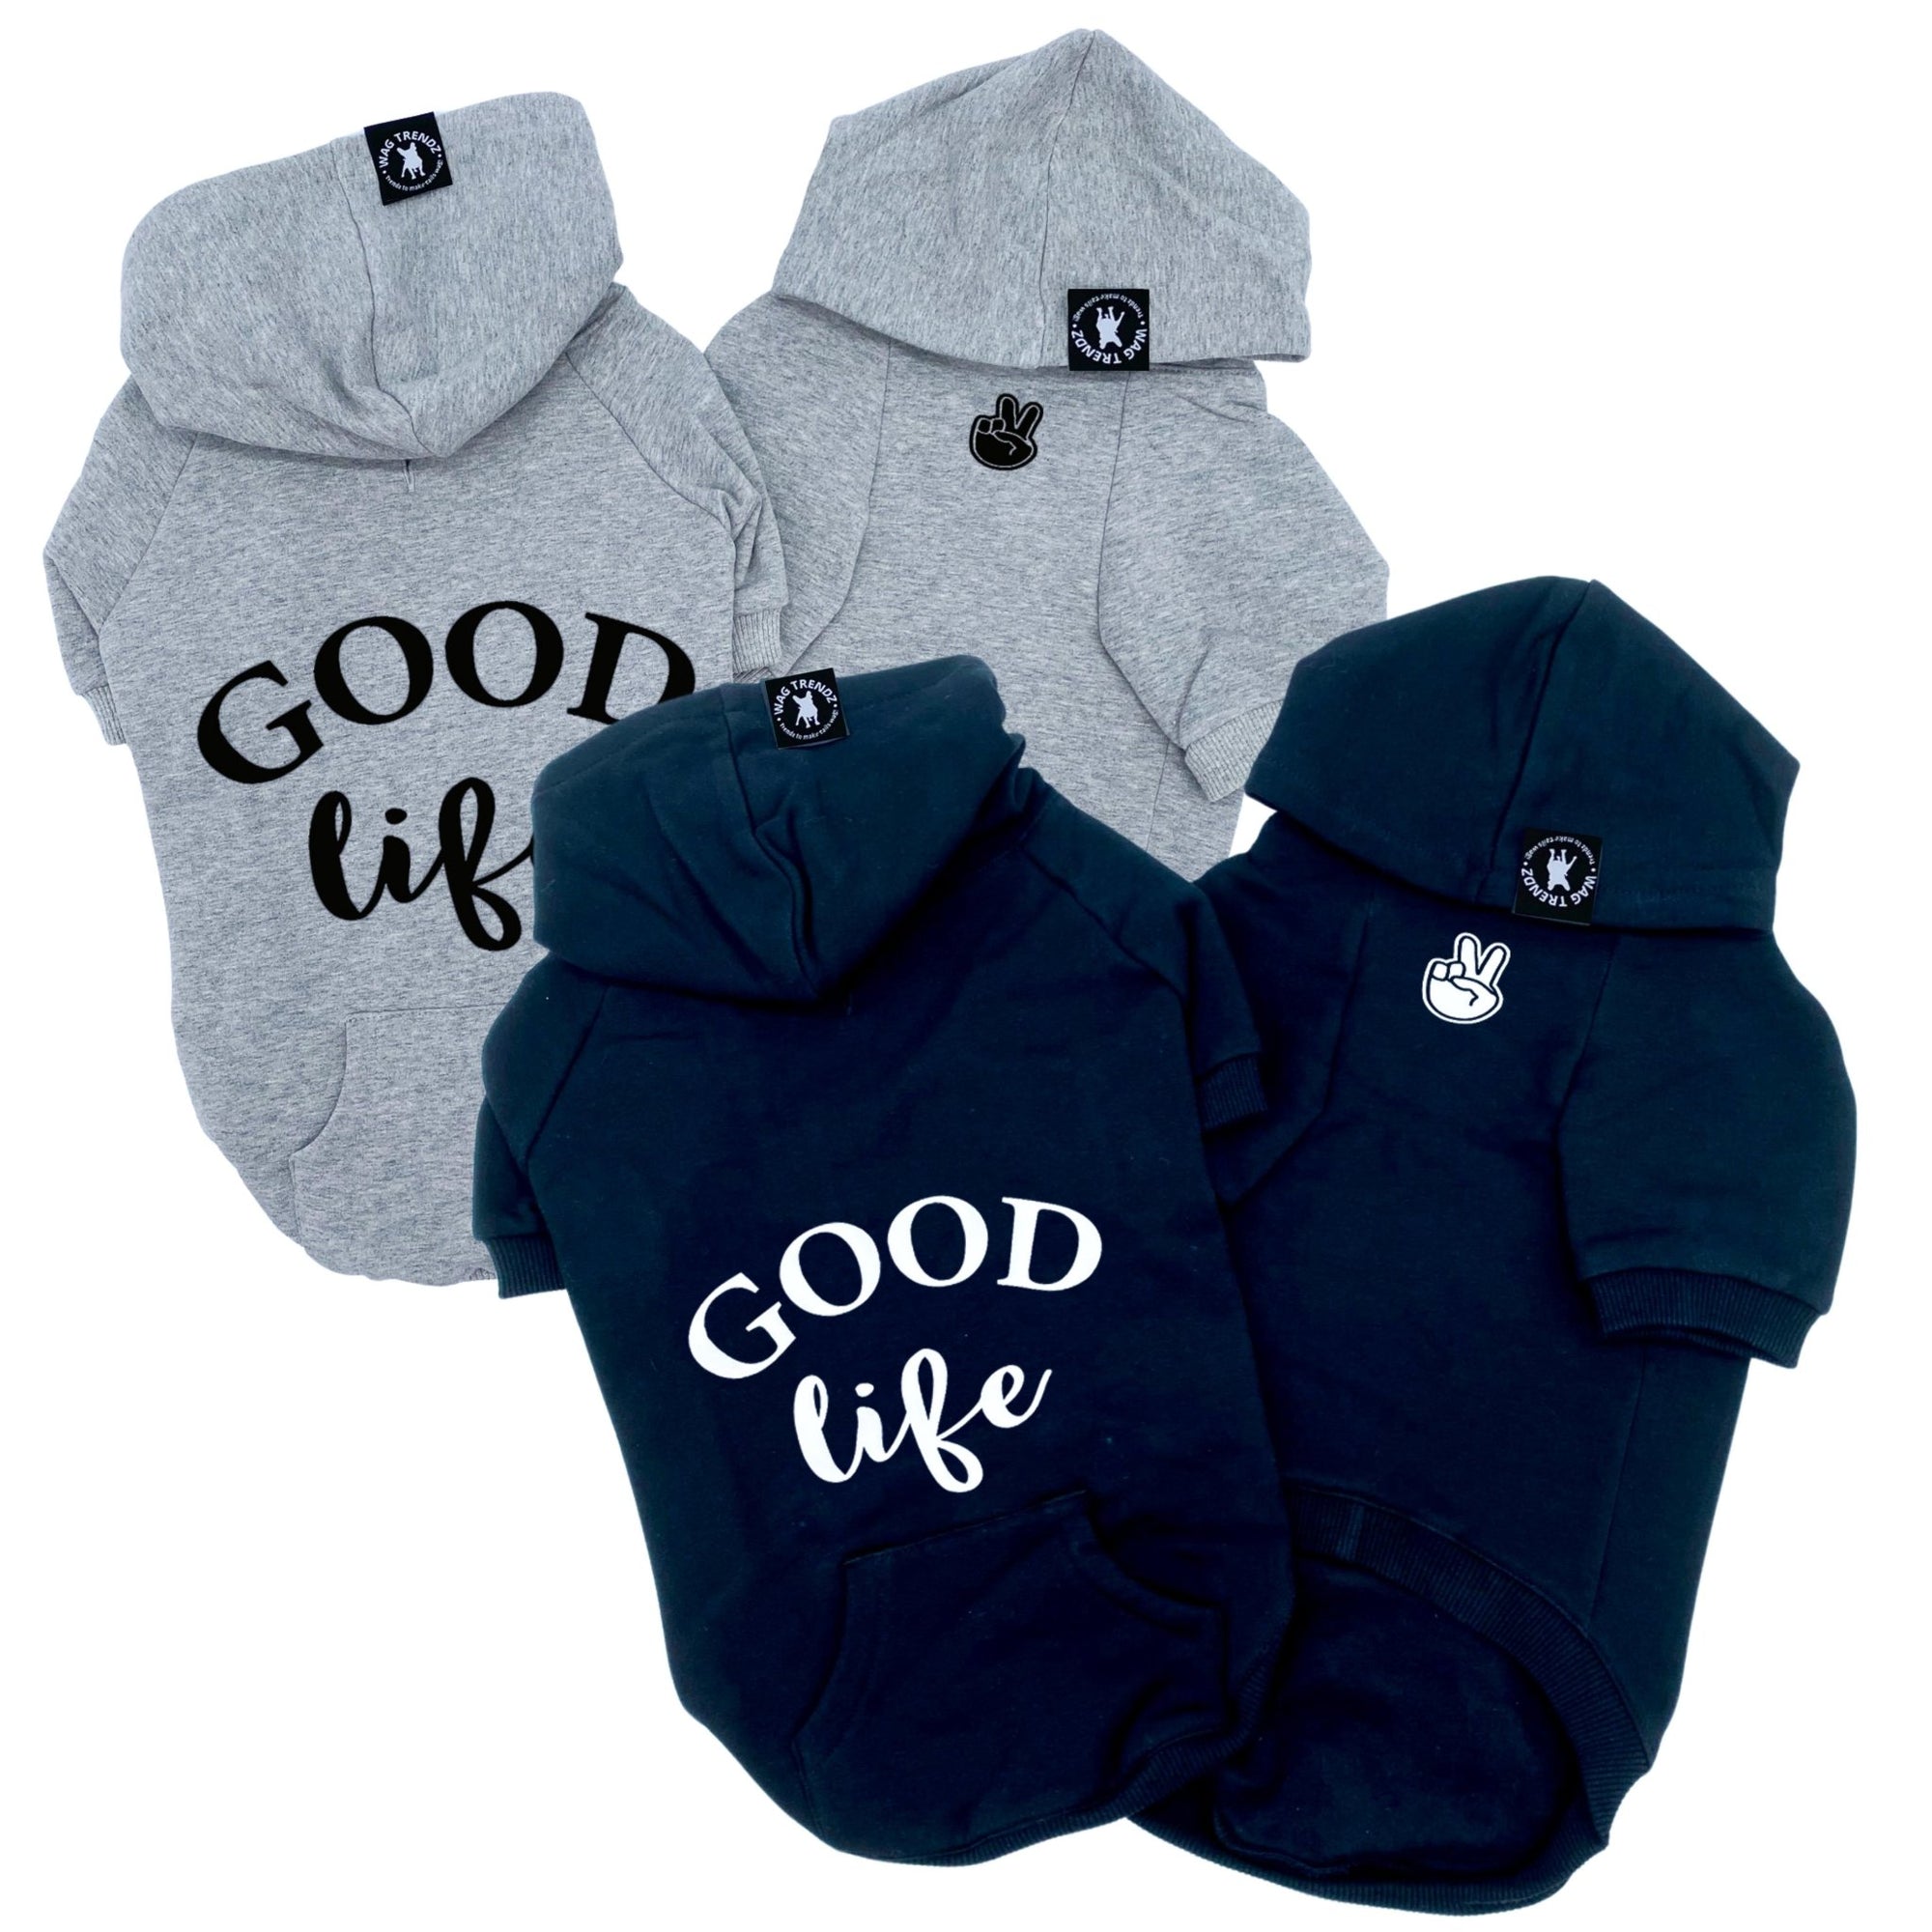 Dog Hoodie - Hoodies For Dogs - &quot;Good Life&quot; dog hoodies in gray and black sets - Good Life on the back and finger peace sign emoji on front chest - against solid white background - Wag Trendz